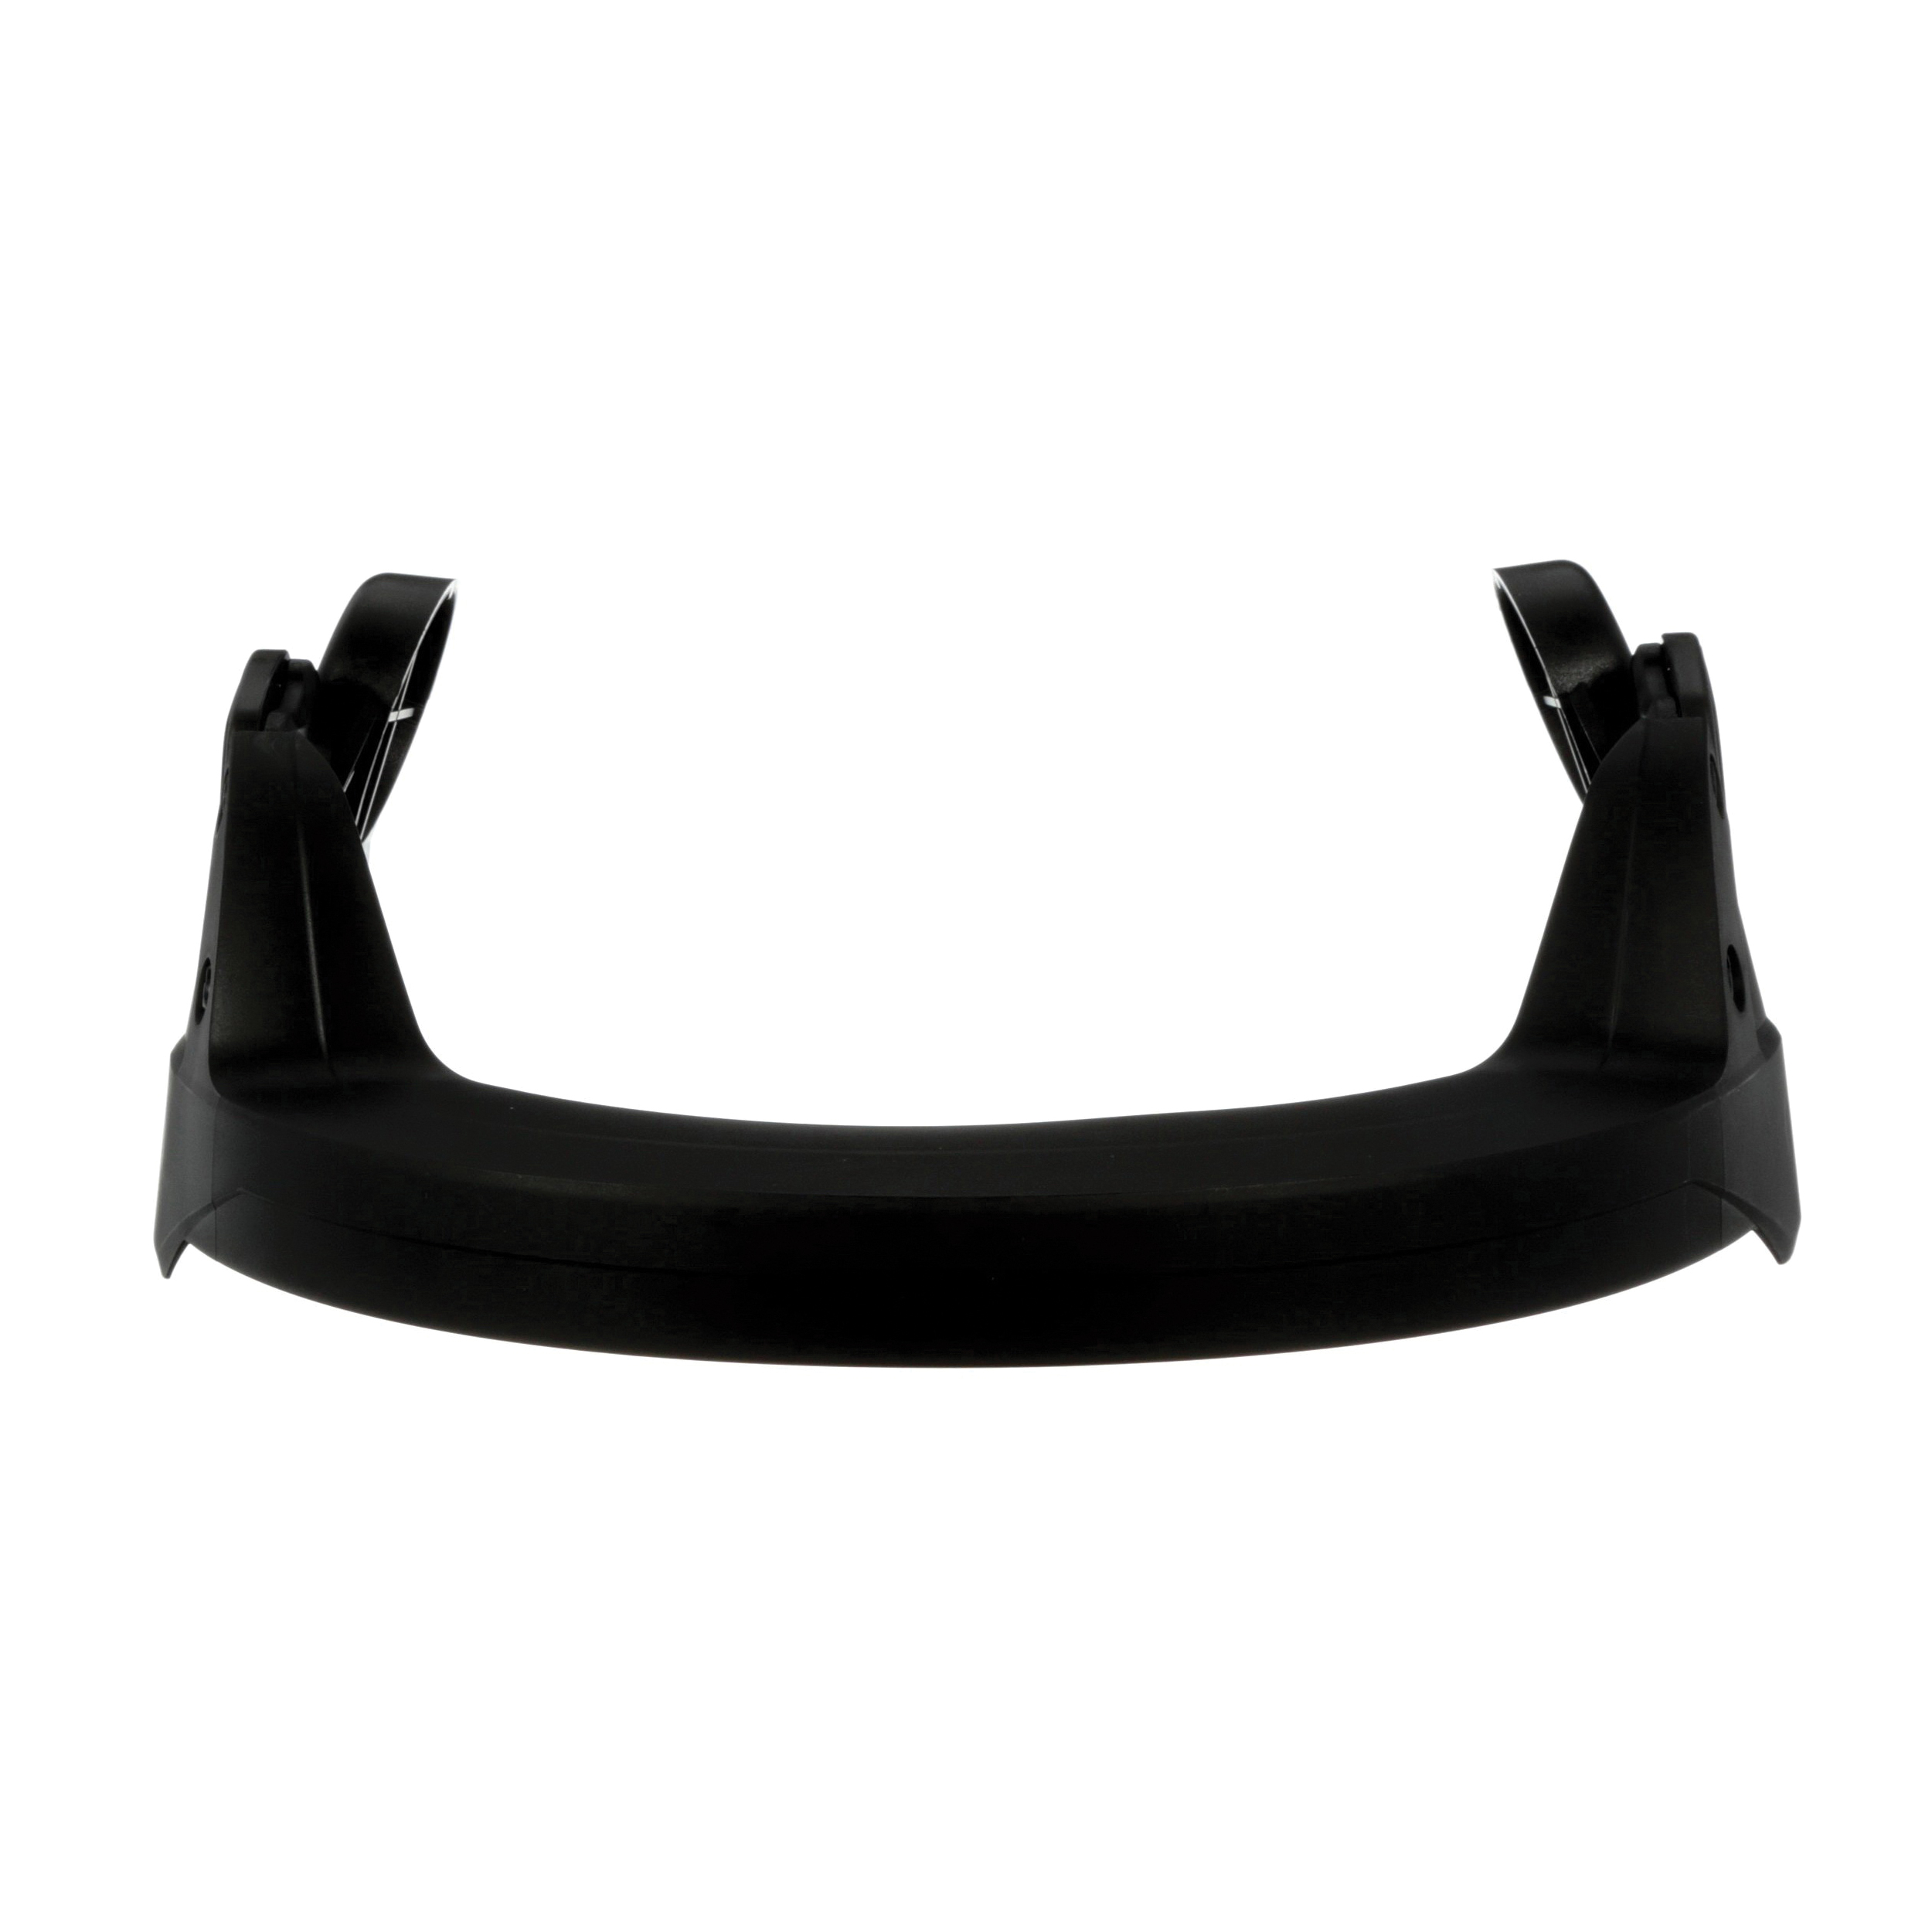 3M™ 7100179142 Faceshield Holder, For Use With SecureFit™ X5000 Series Safety Helmets, Nylon, Black